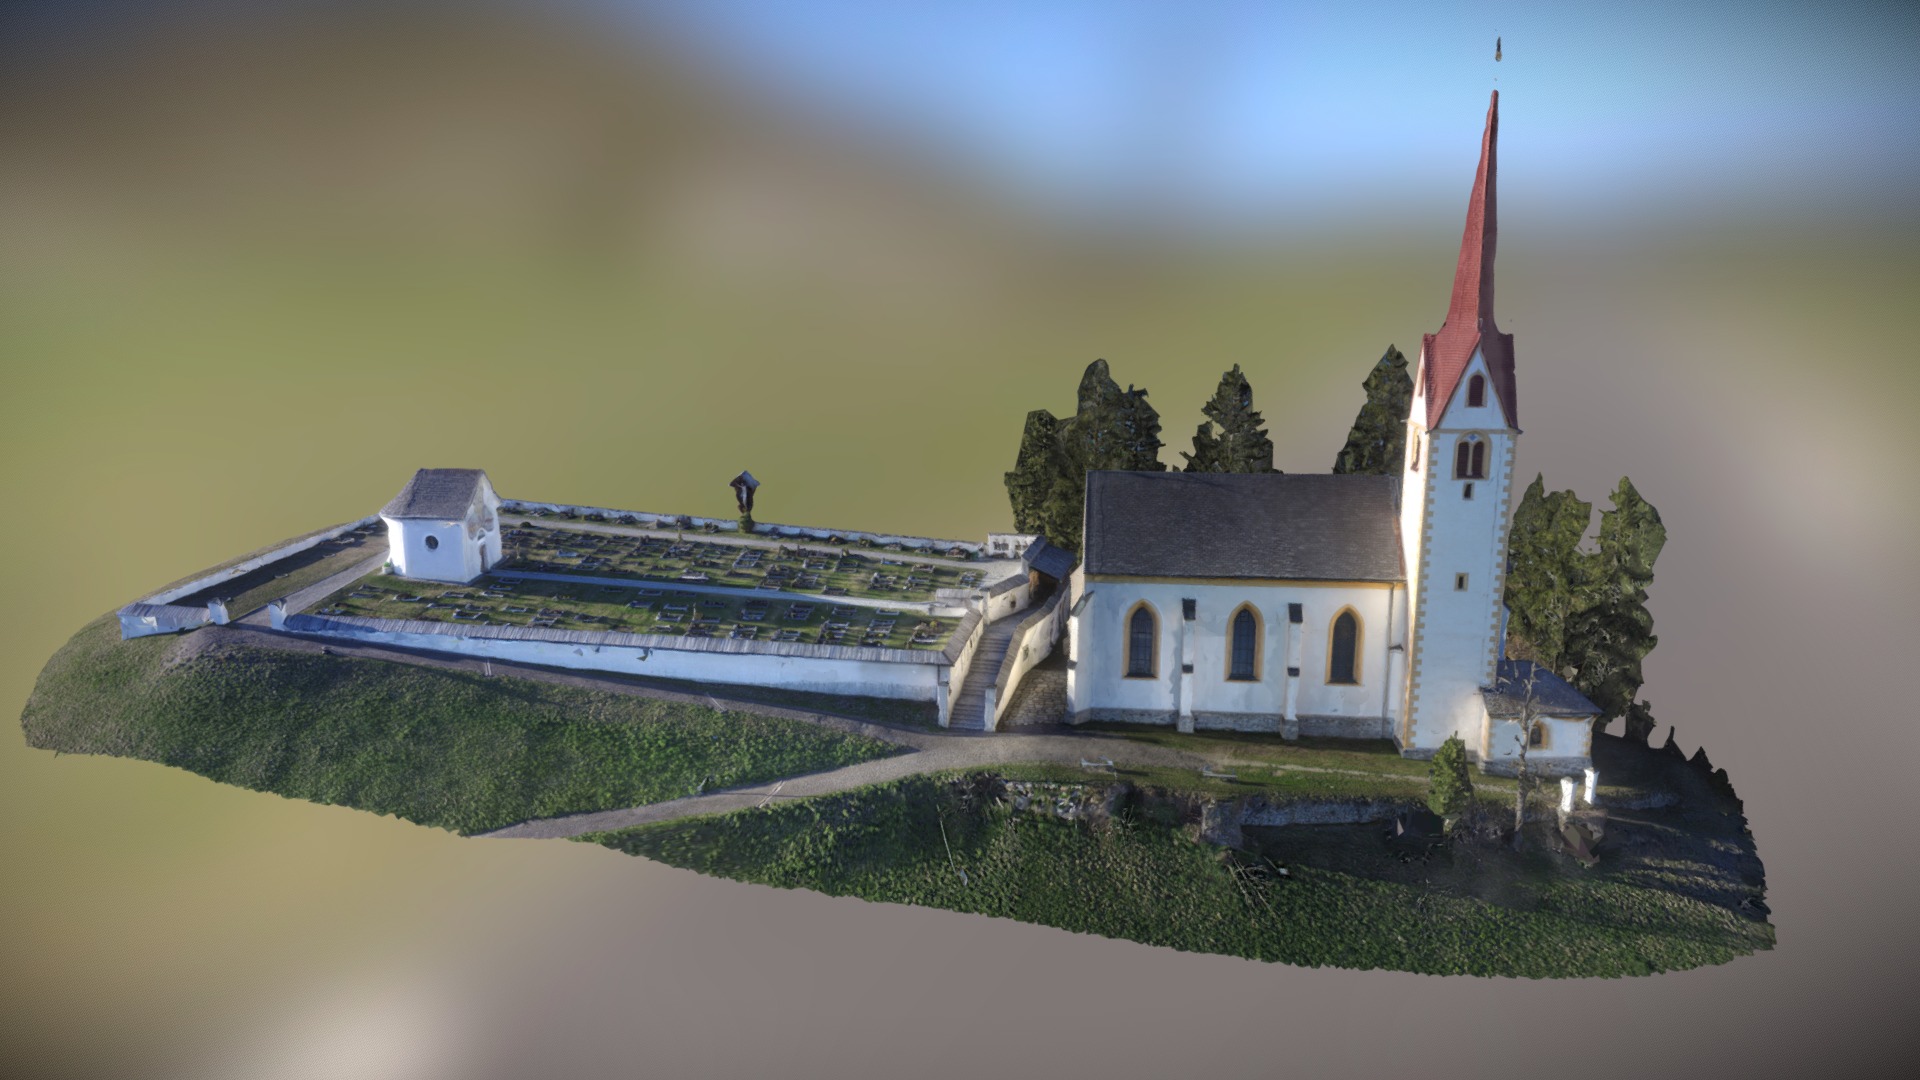 3D model St. Jakobs Pfarrkirche Strassen - This is a 3D model of the St. Jakobs Pfarrkirche Strassen. The 3D model is about a building on a small island.